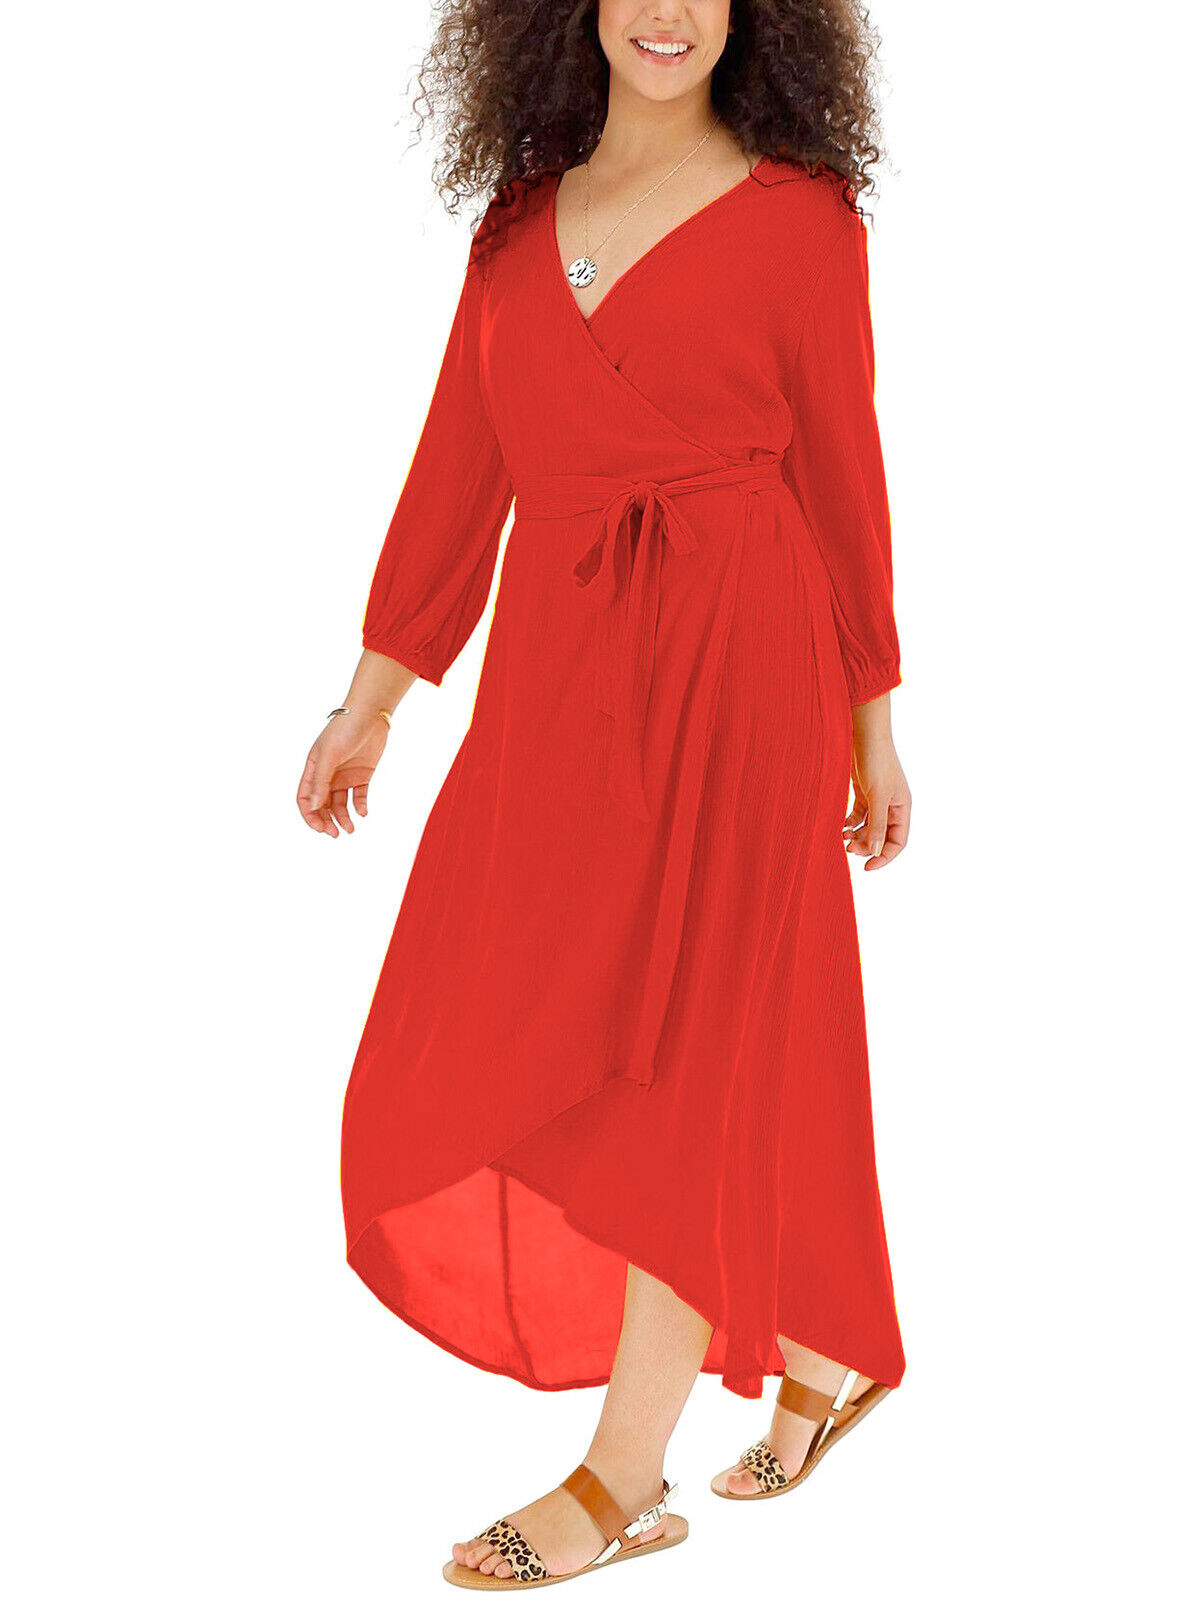 Simply Be Coral Dipped Hem Crinkle Wrap Dress in Size 16 RRP £35